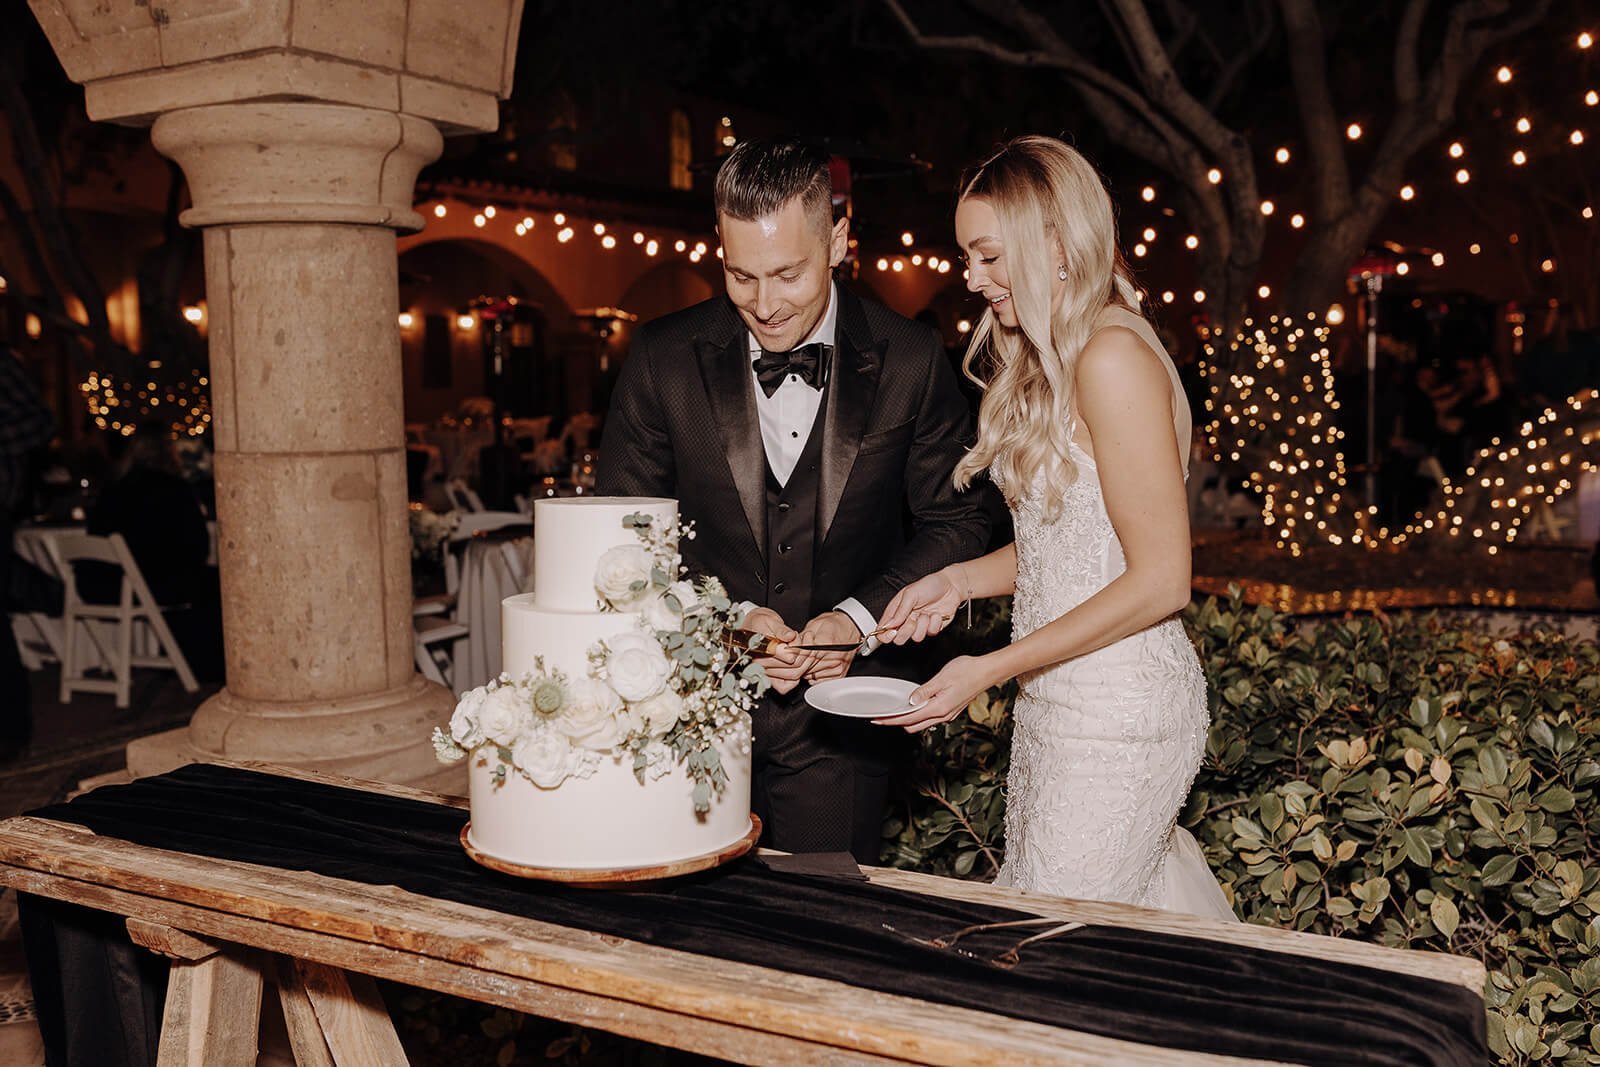 Bride and groom cutting wedding cake at classy black and white wedding in Arizona